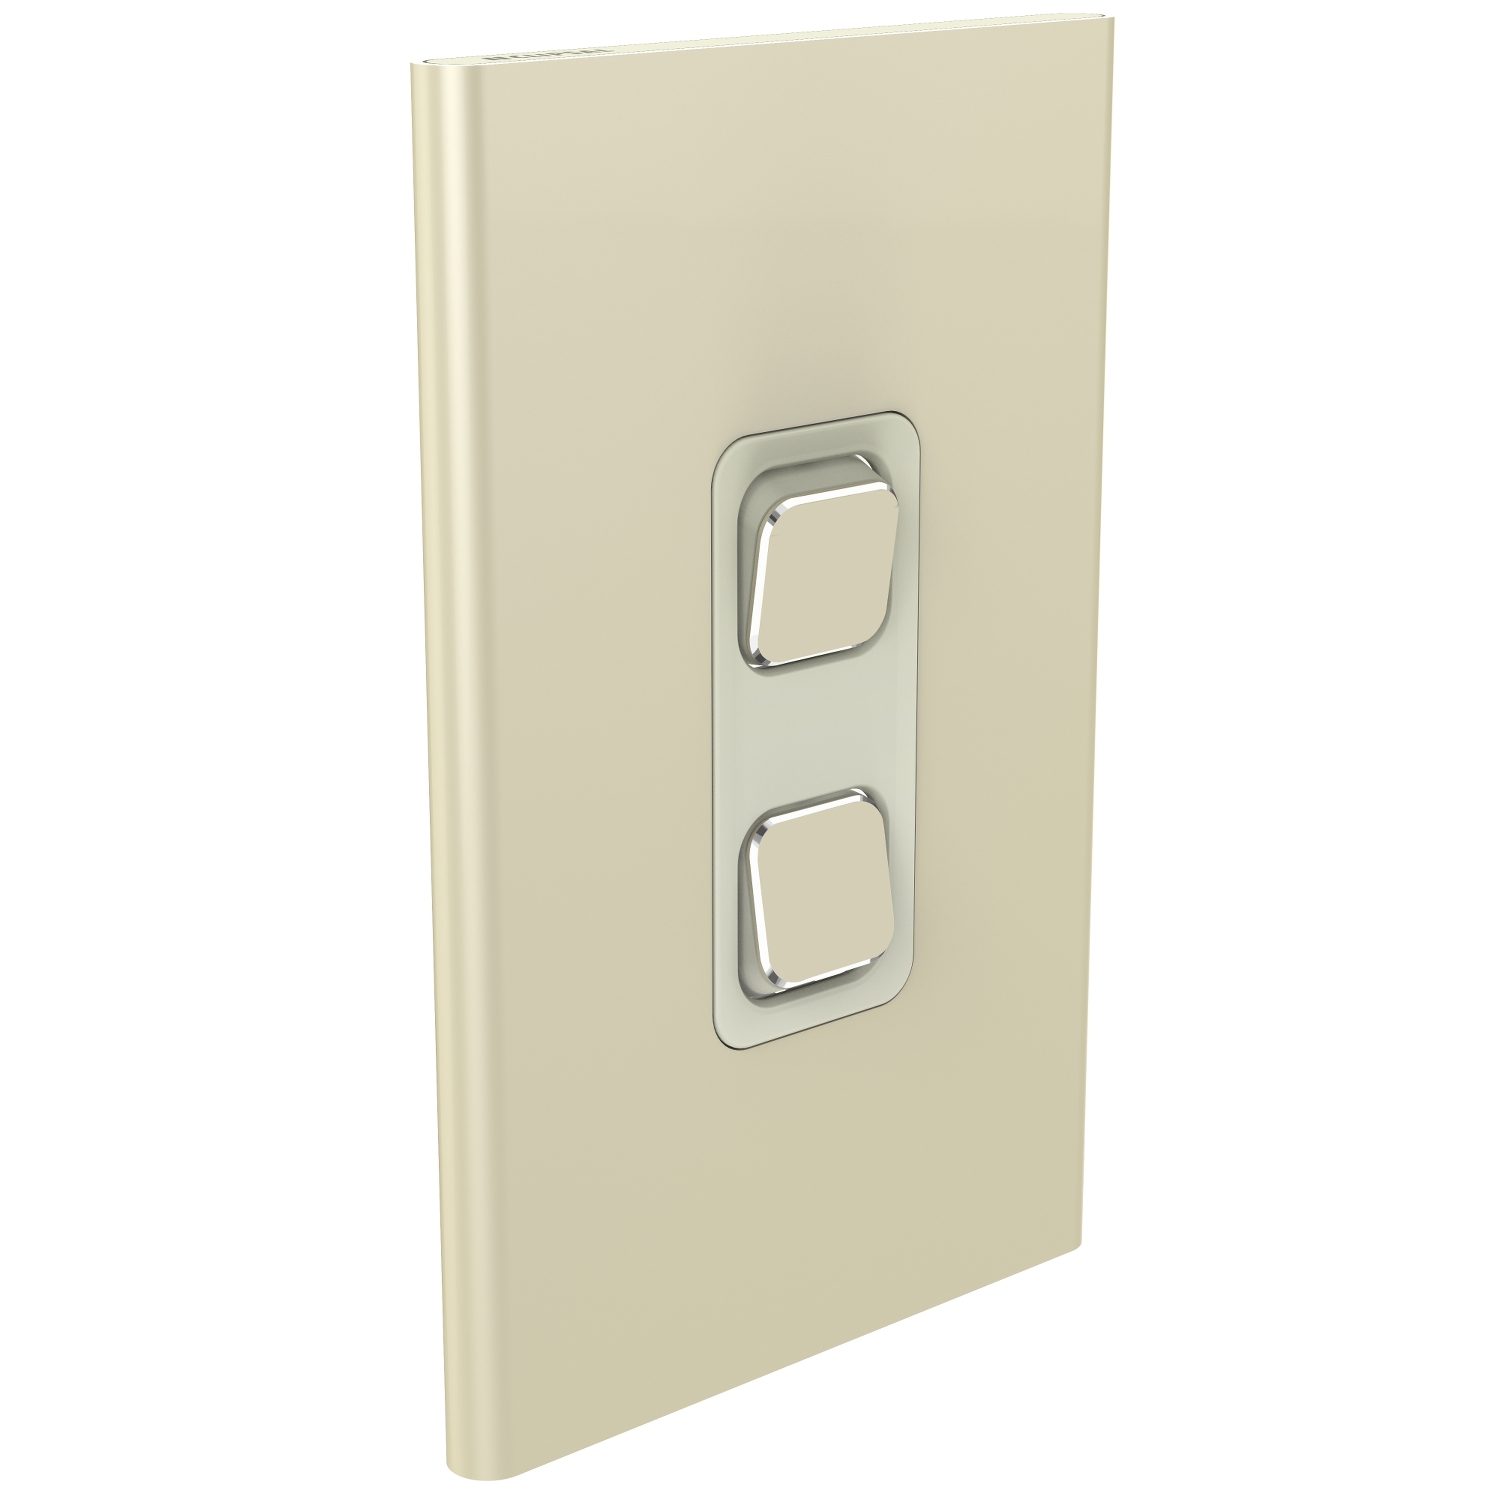 PDL Iconic Styl - Cover Plate Switch 2-Gang - Crowne